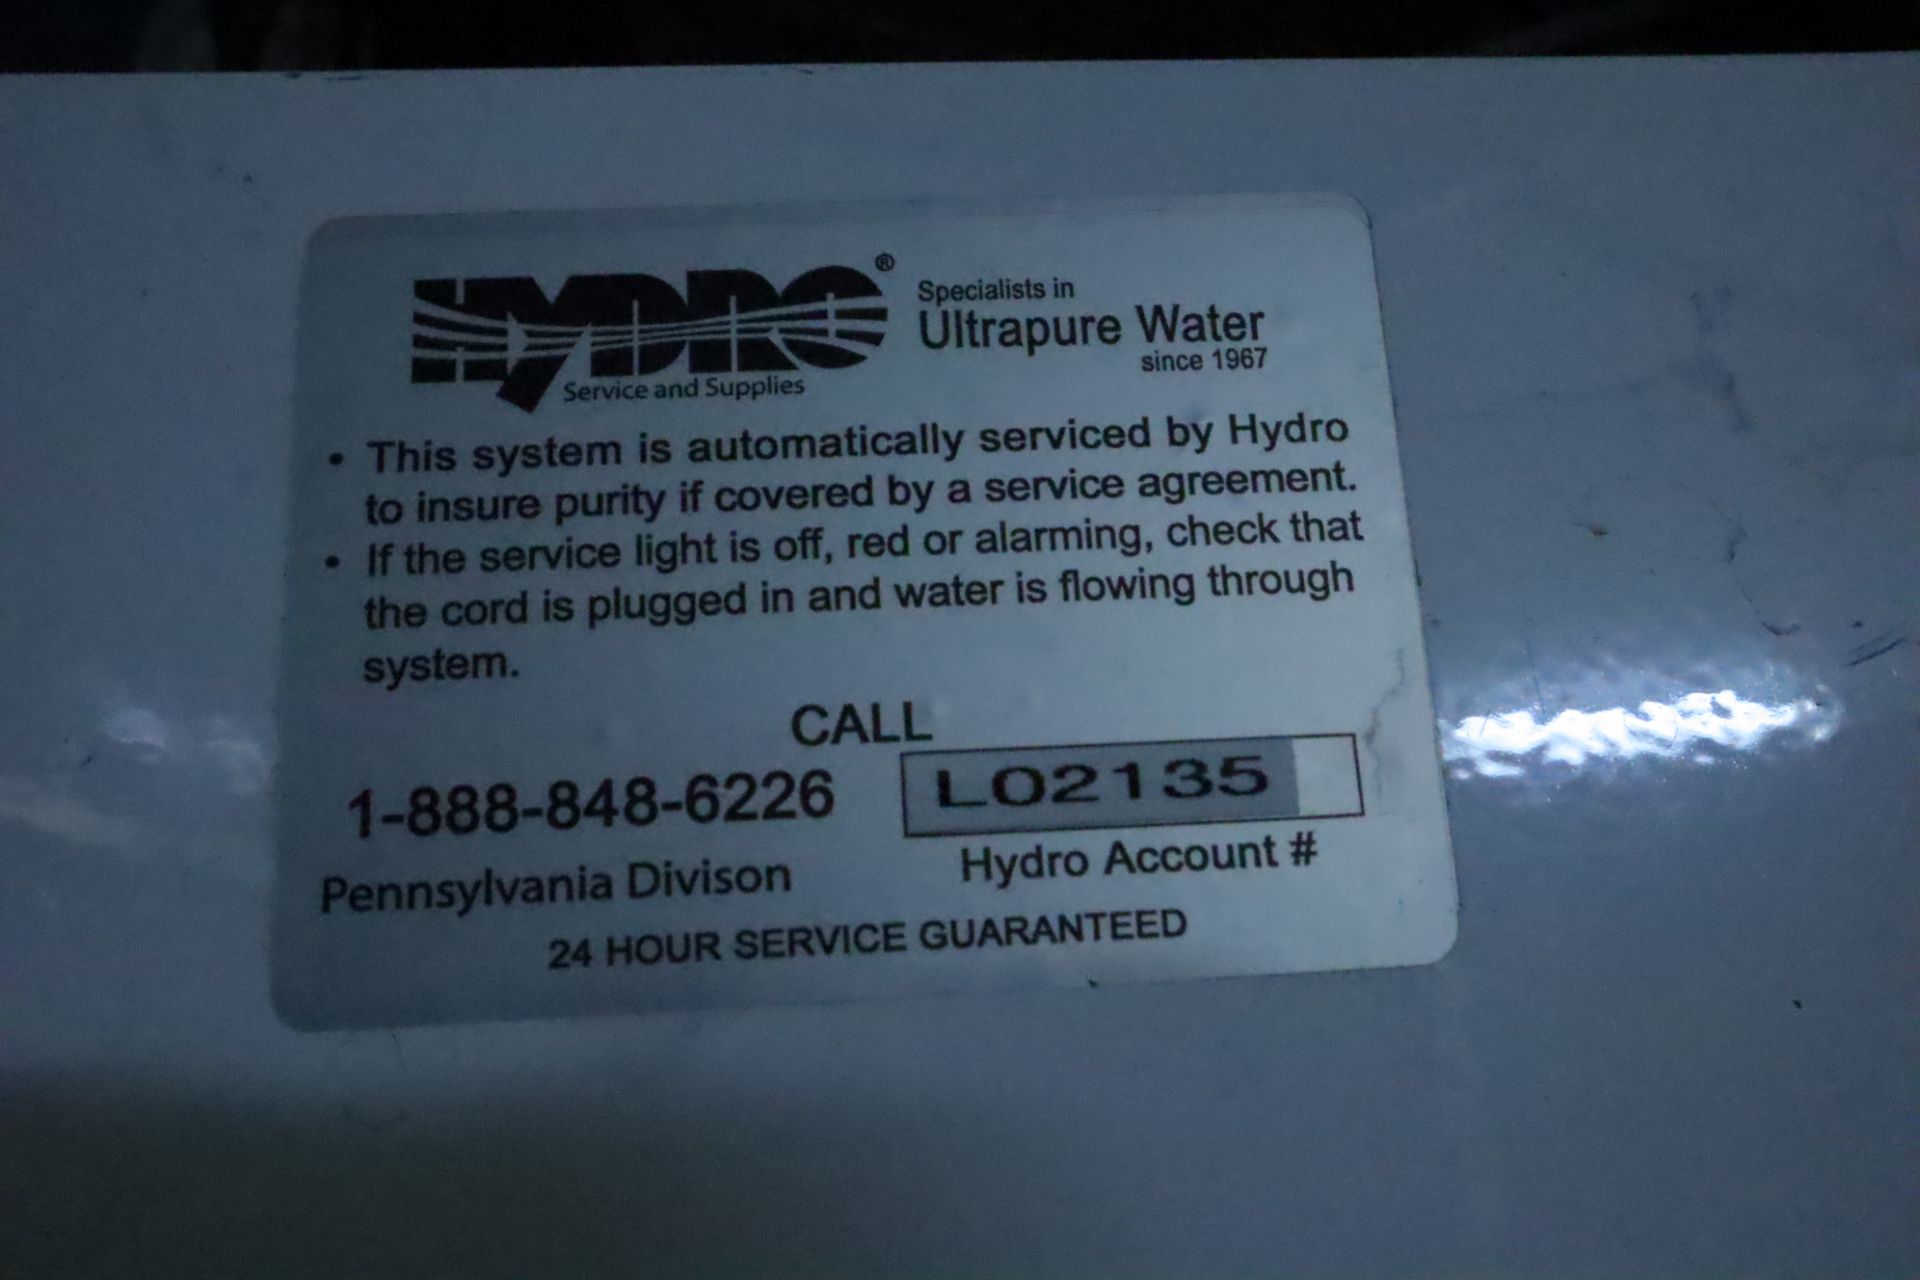 Hydro Picopure UV Plus Ultra Water Purification System - Image 3 of 3